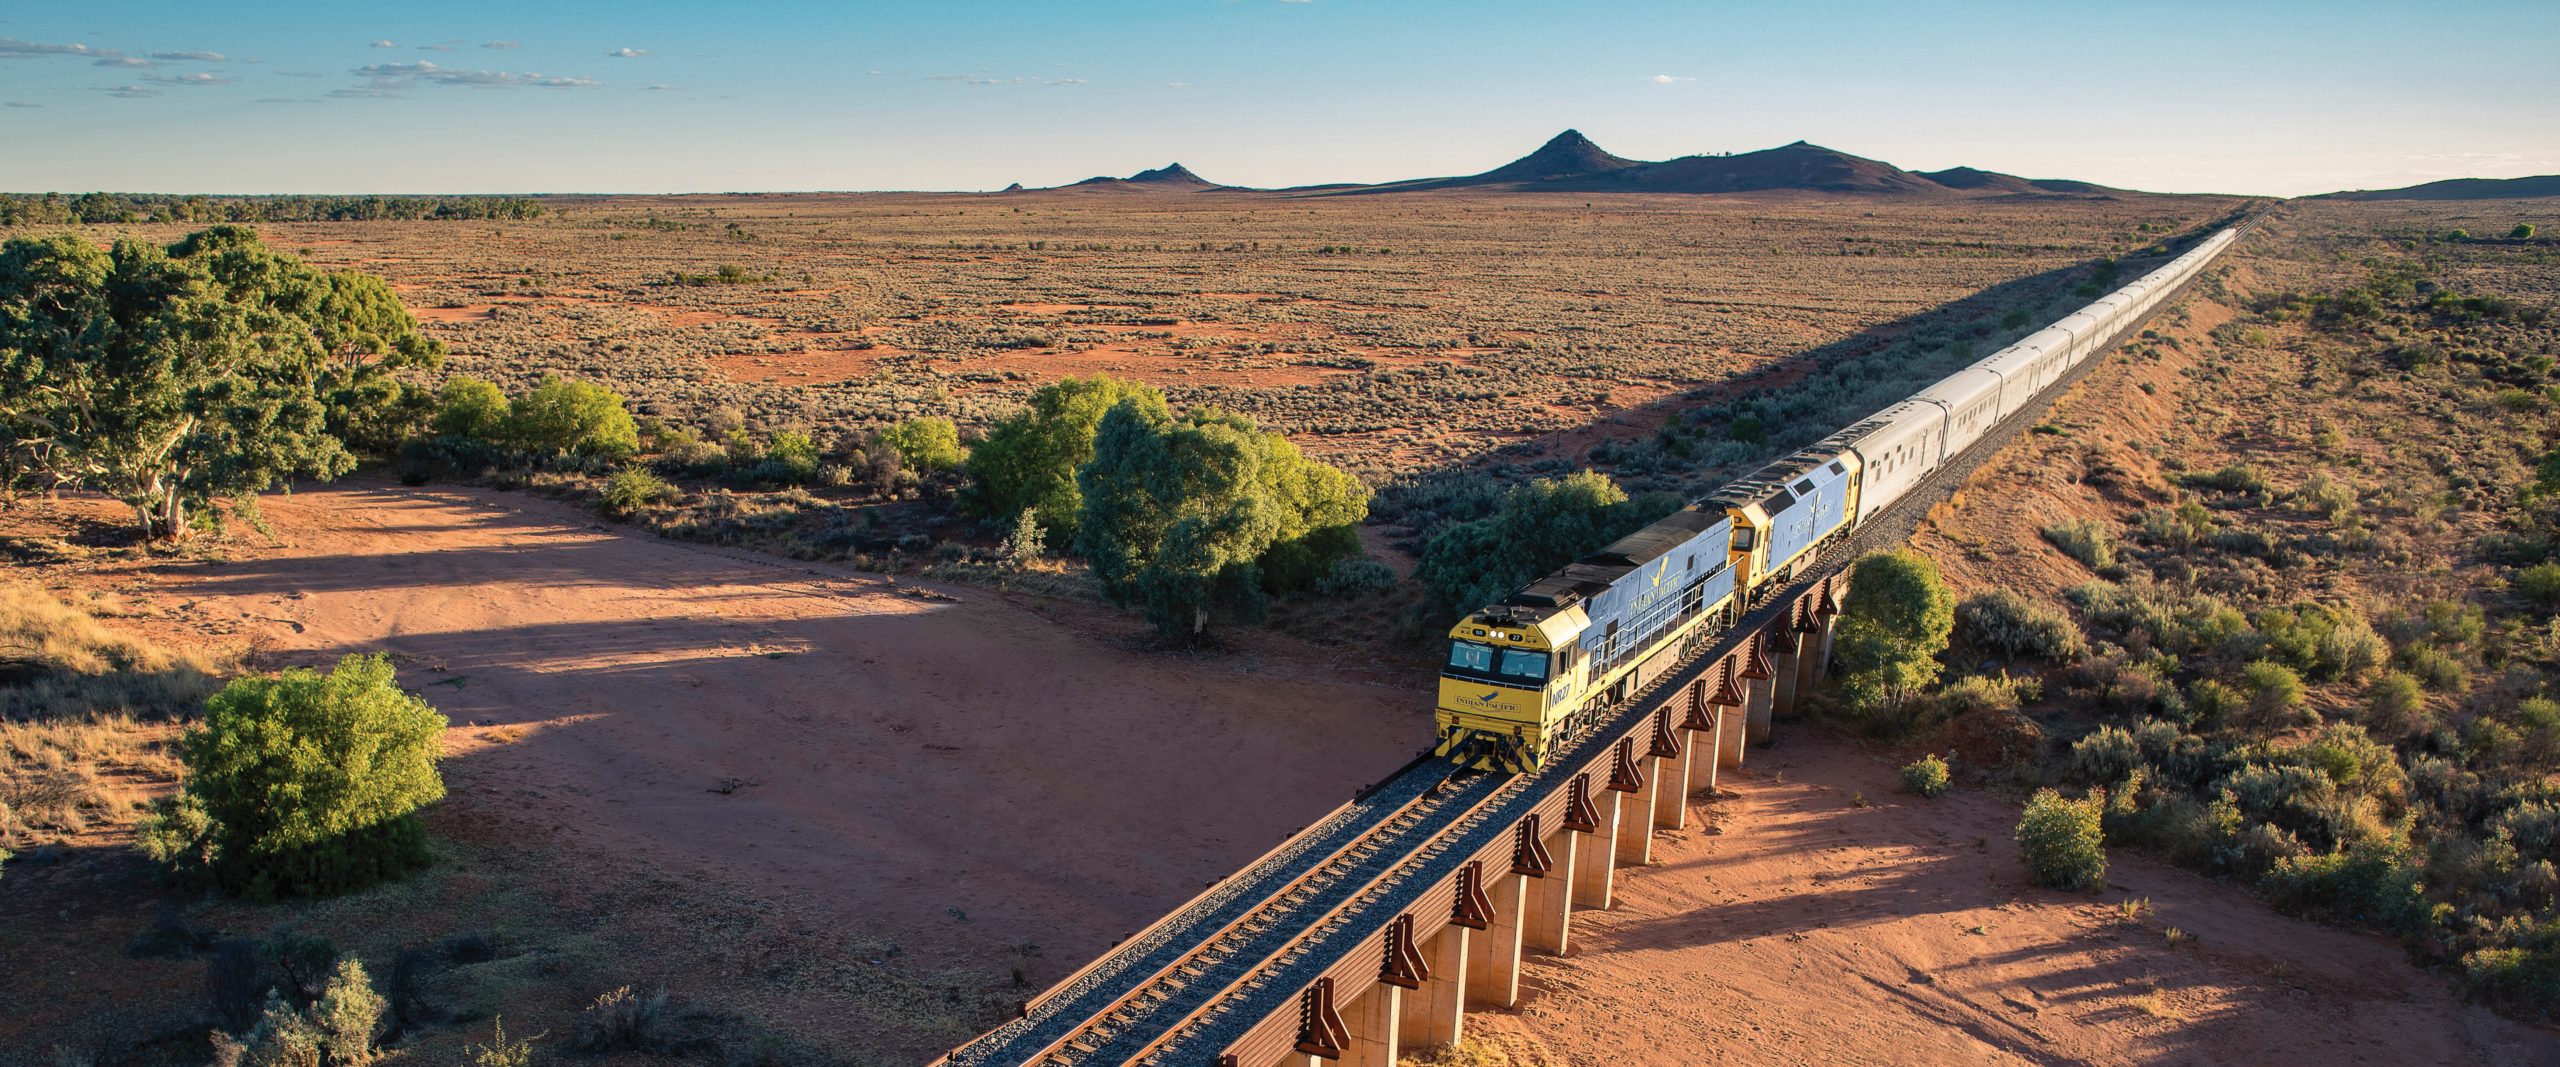 The Indian Pacific. Image: Journey Beyond